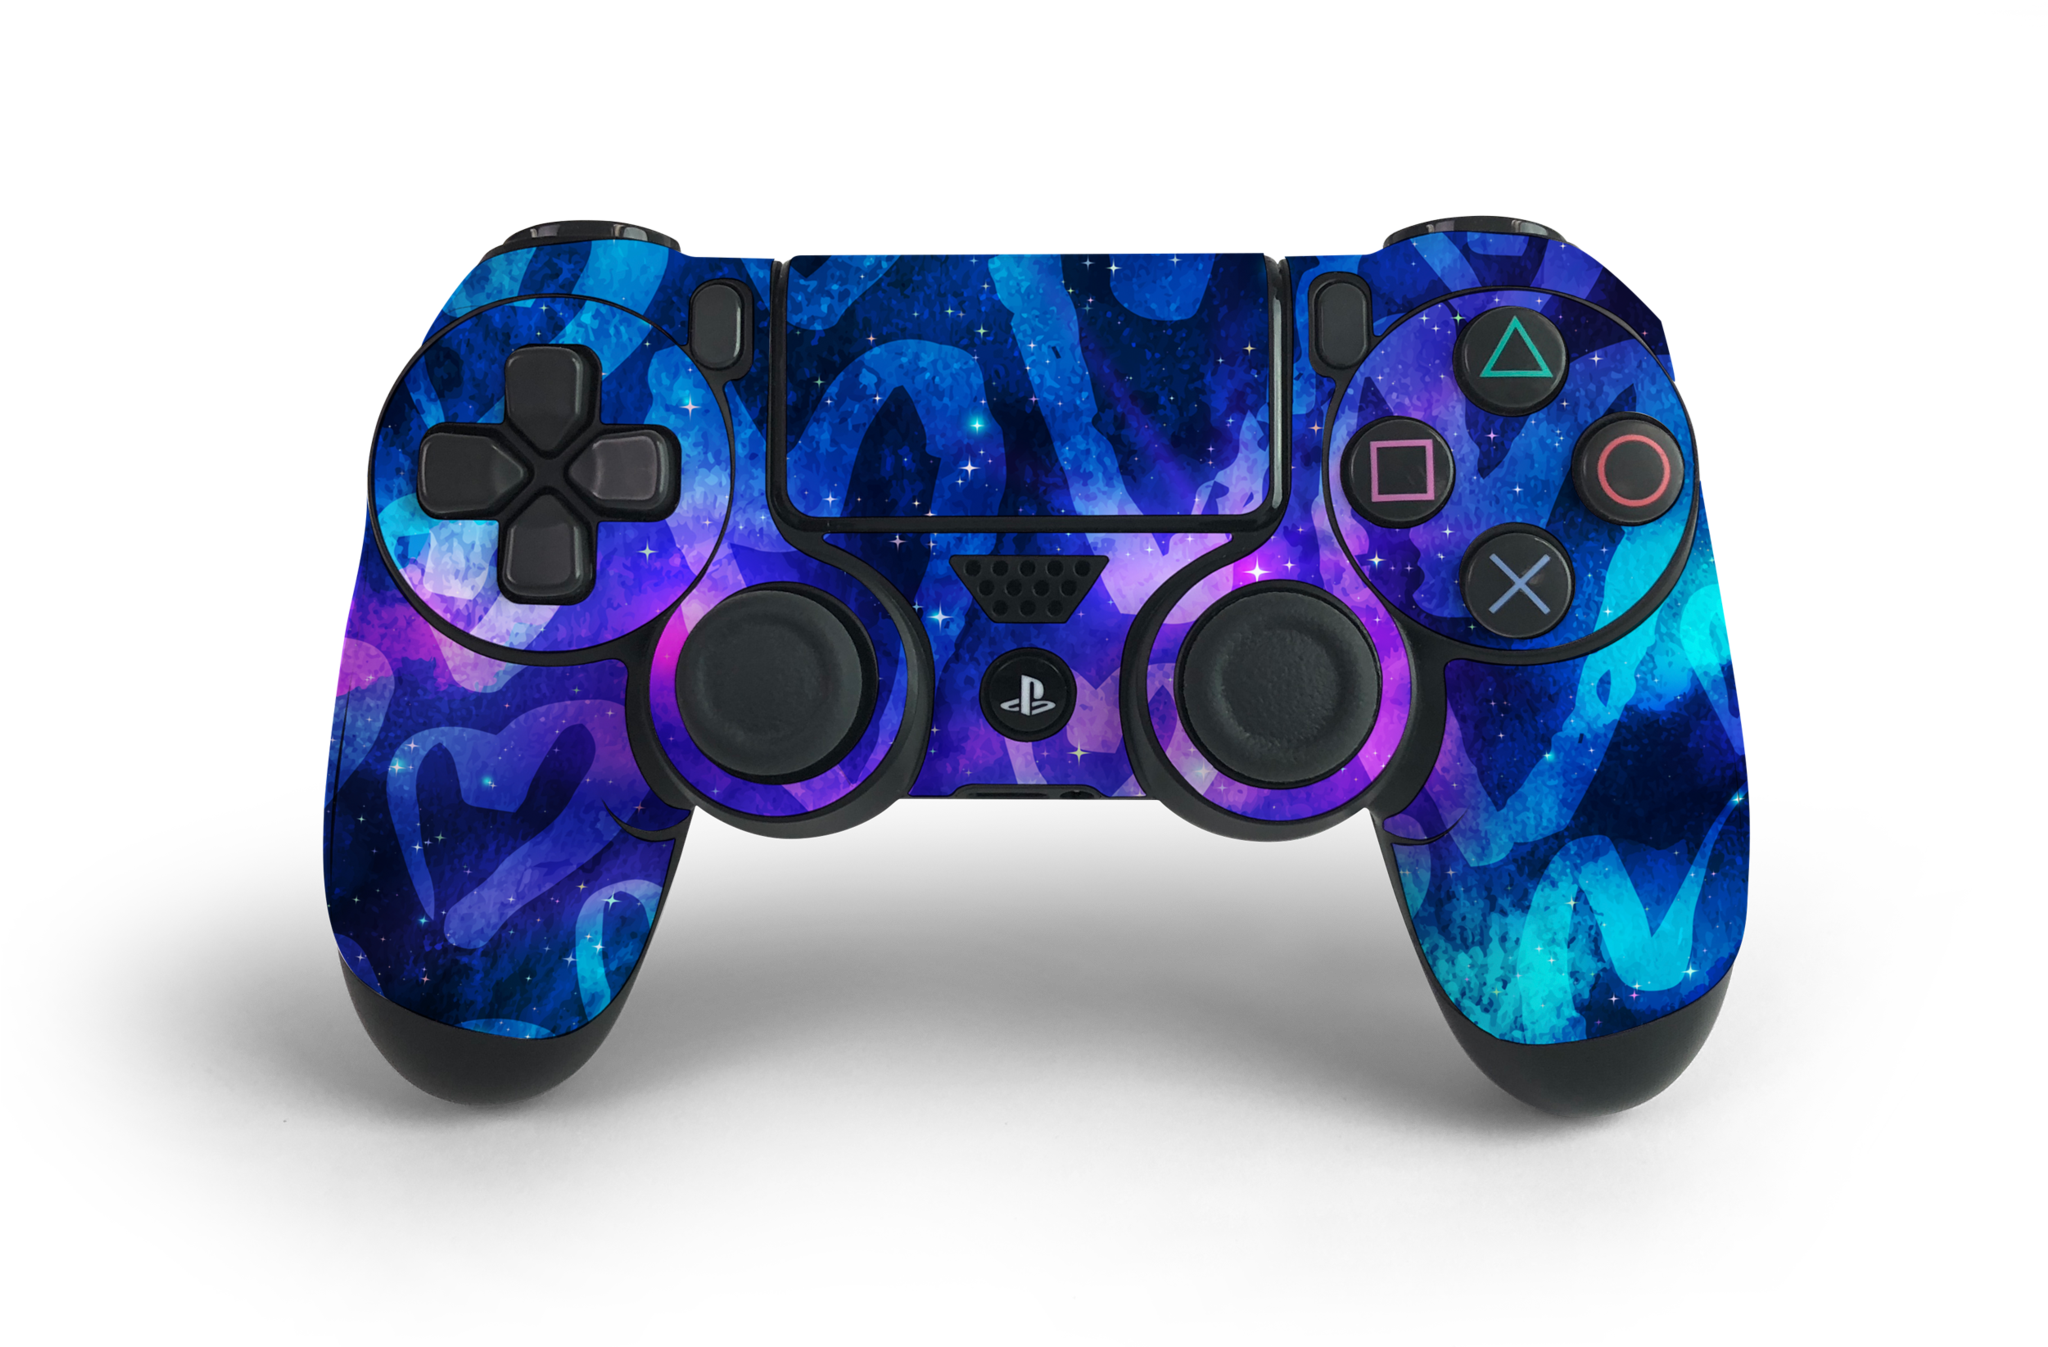 A Video Game Controller With A Blue And Purple Design